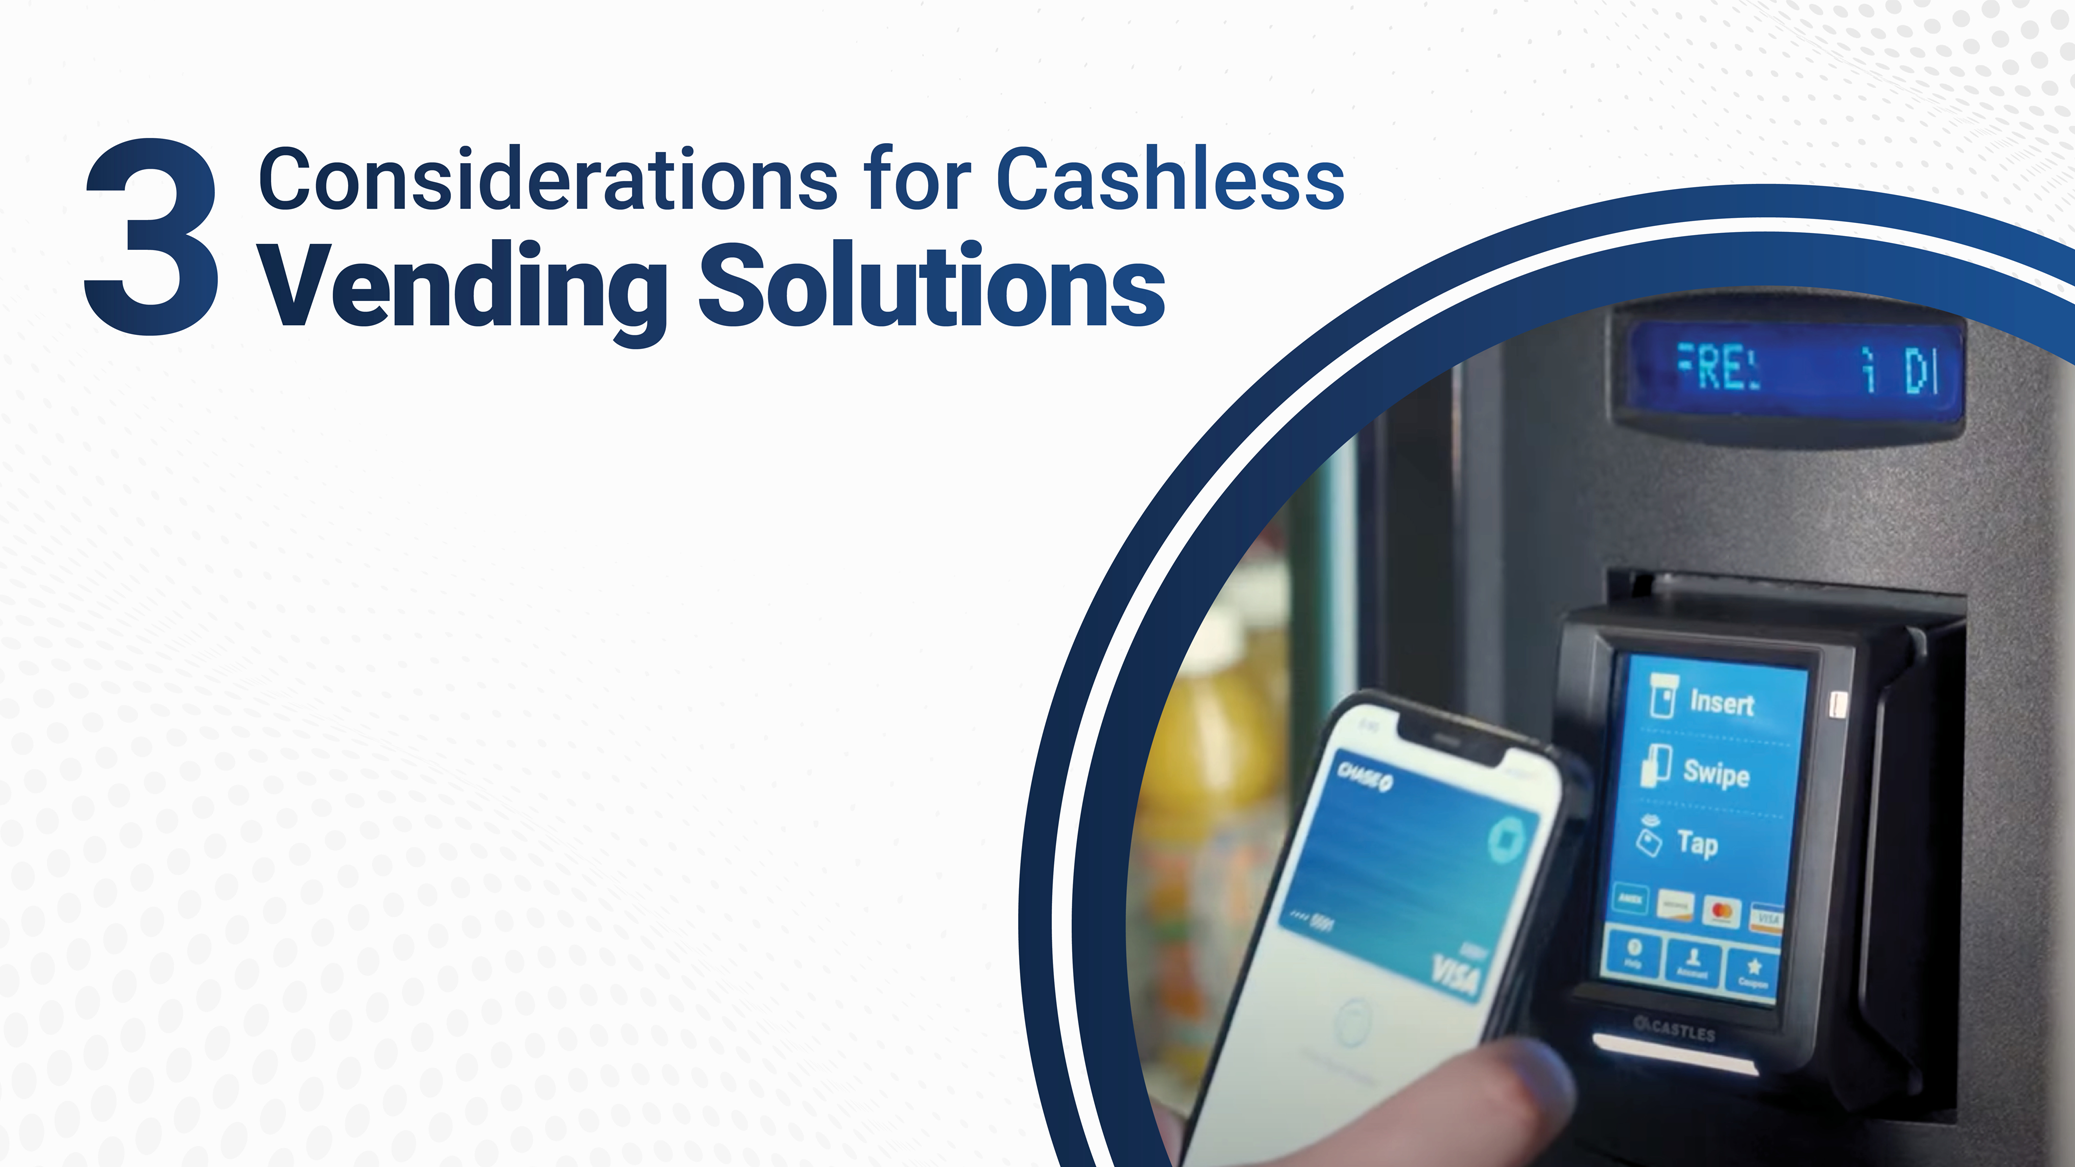 3 Things to Consider When Comparing Cashless Vending Solutions